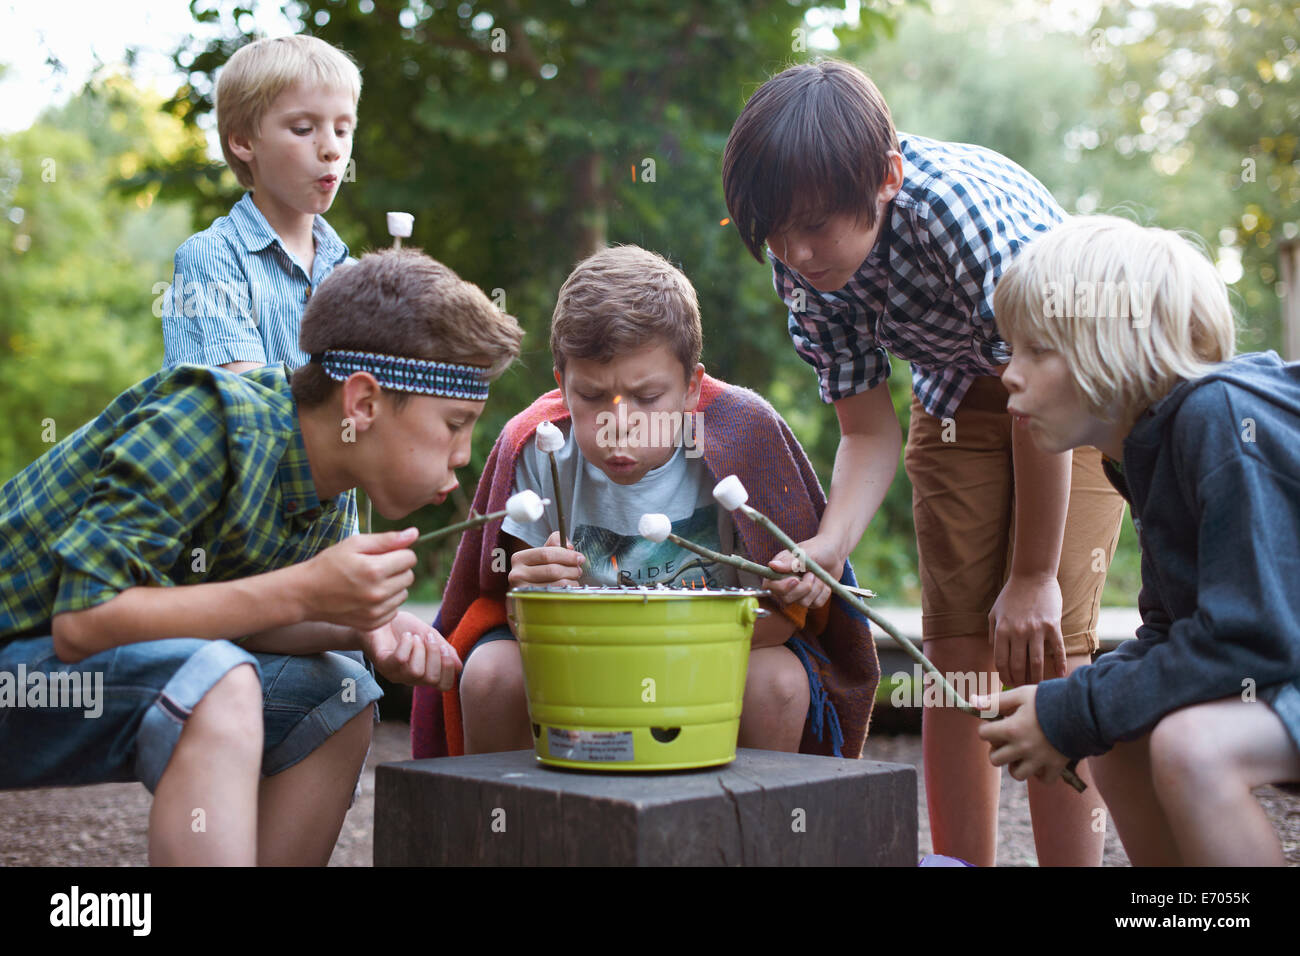 Group of young boys toasting marshmallows over bucket barbecue Stock Photo